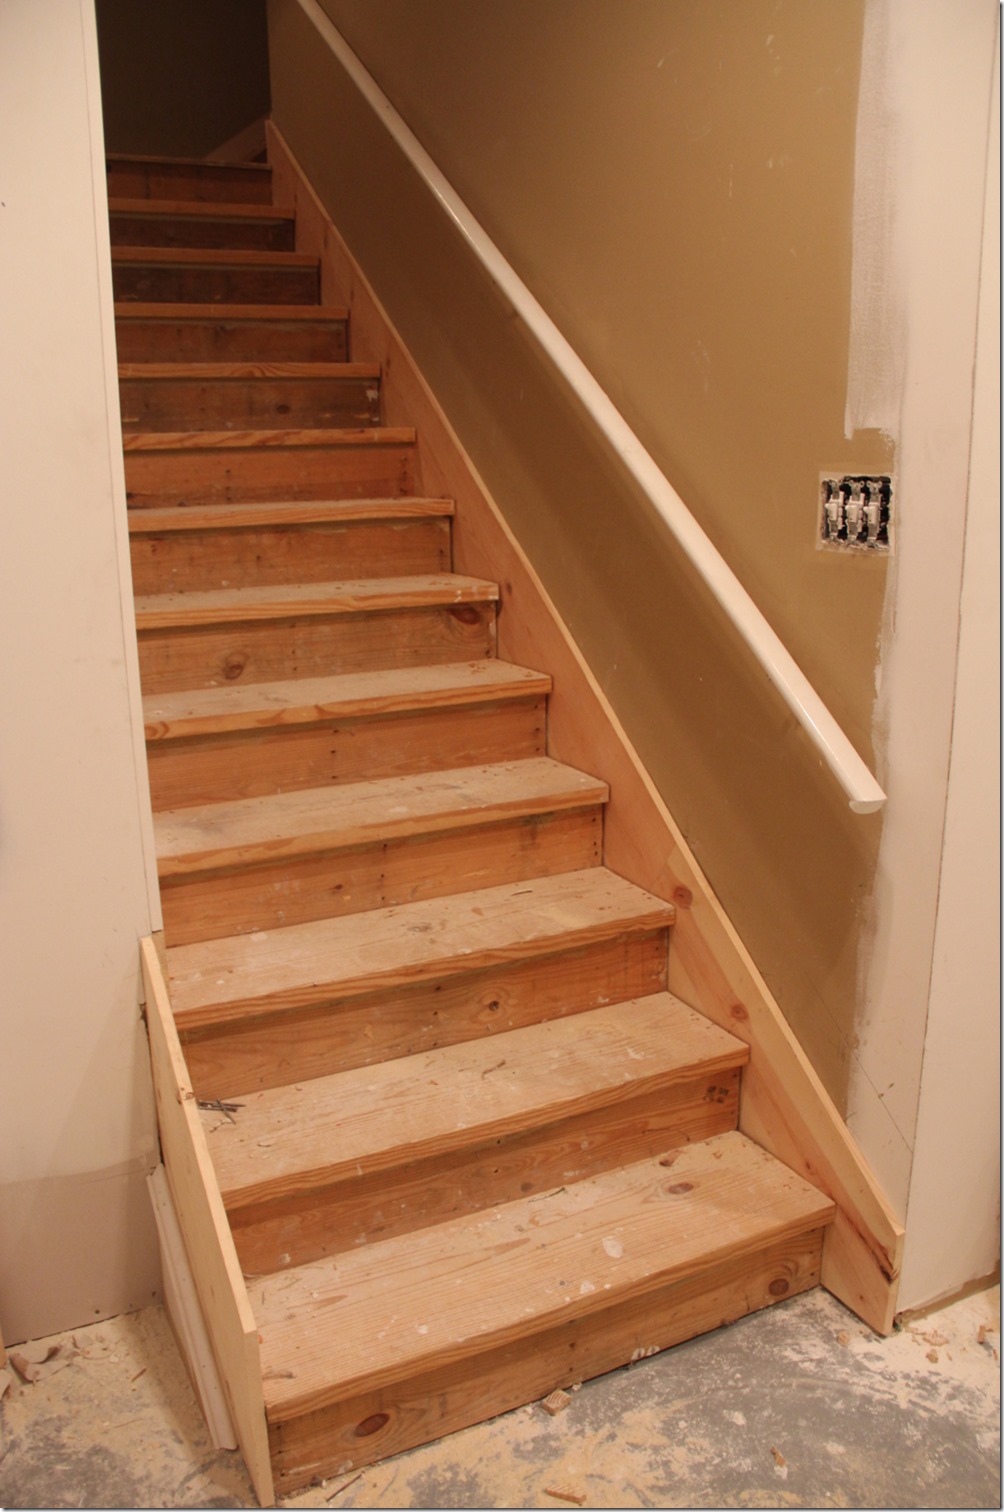 Wood Stairs Pose A Risk In Basement, How To Install Hardwood On Basement Stairs